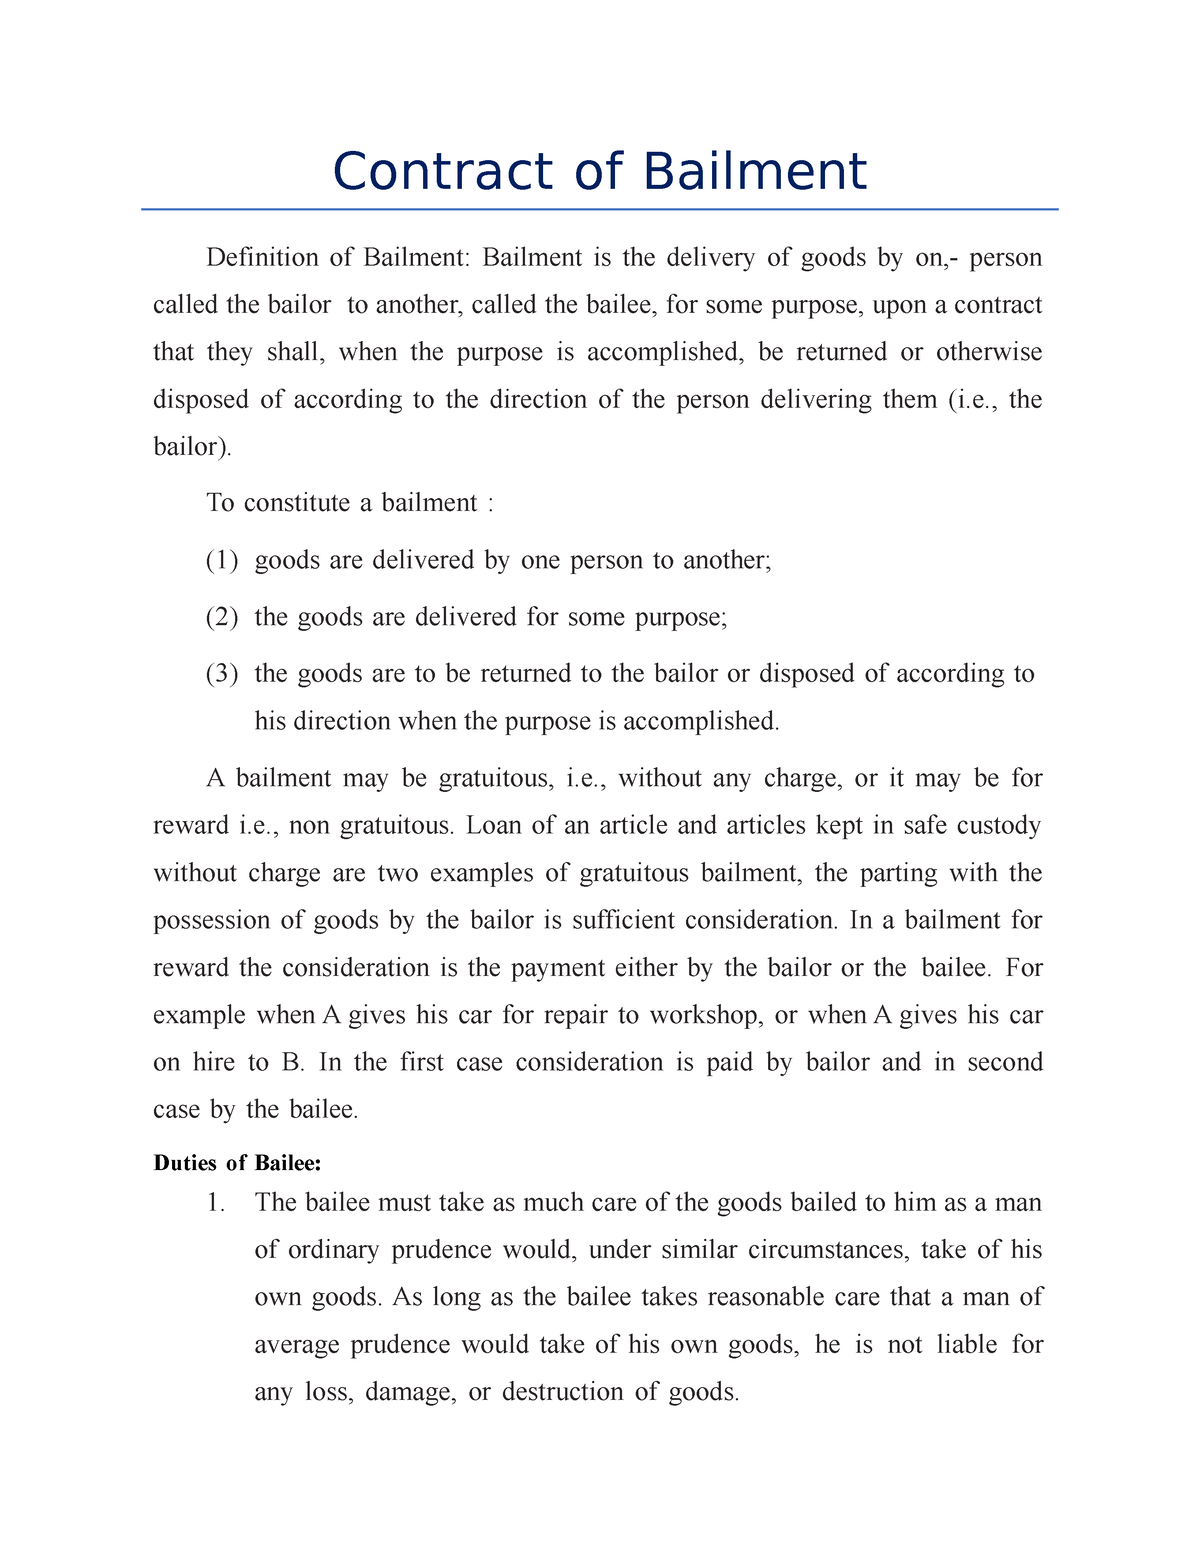 assignment on contract of bailment